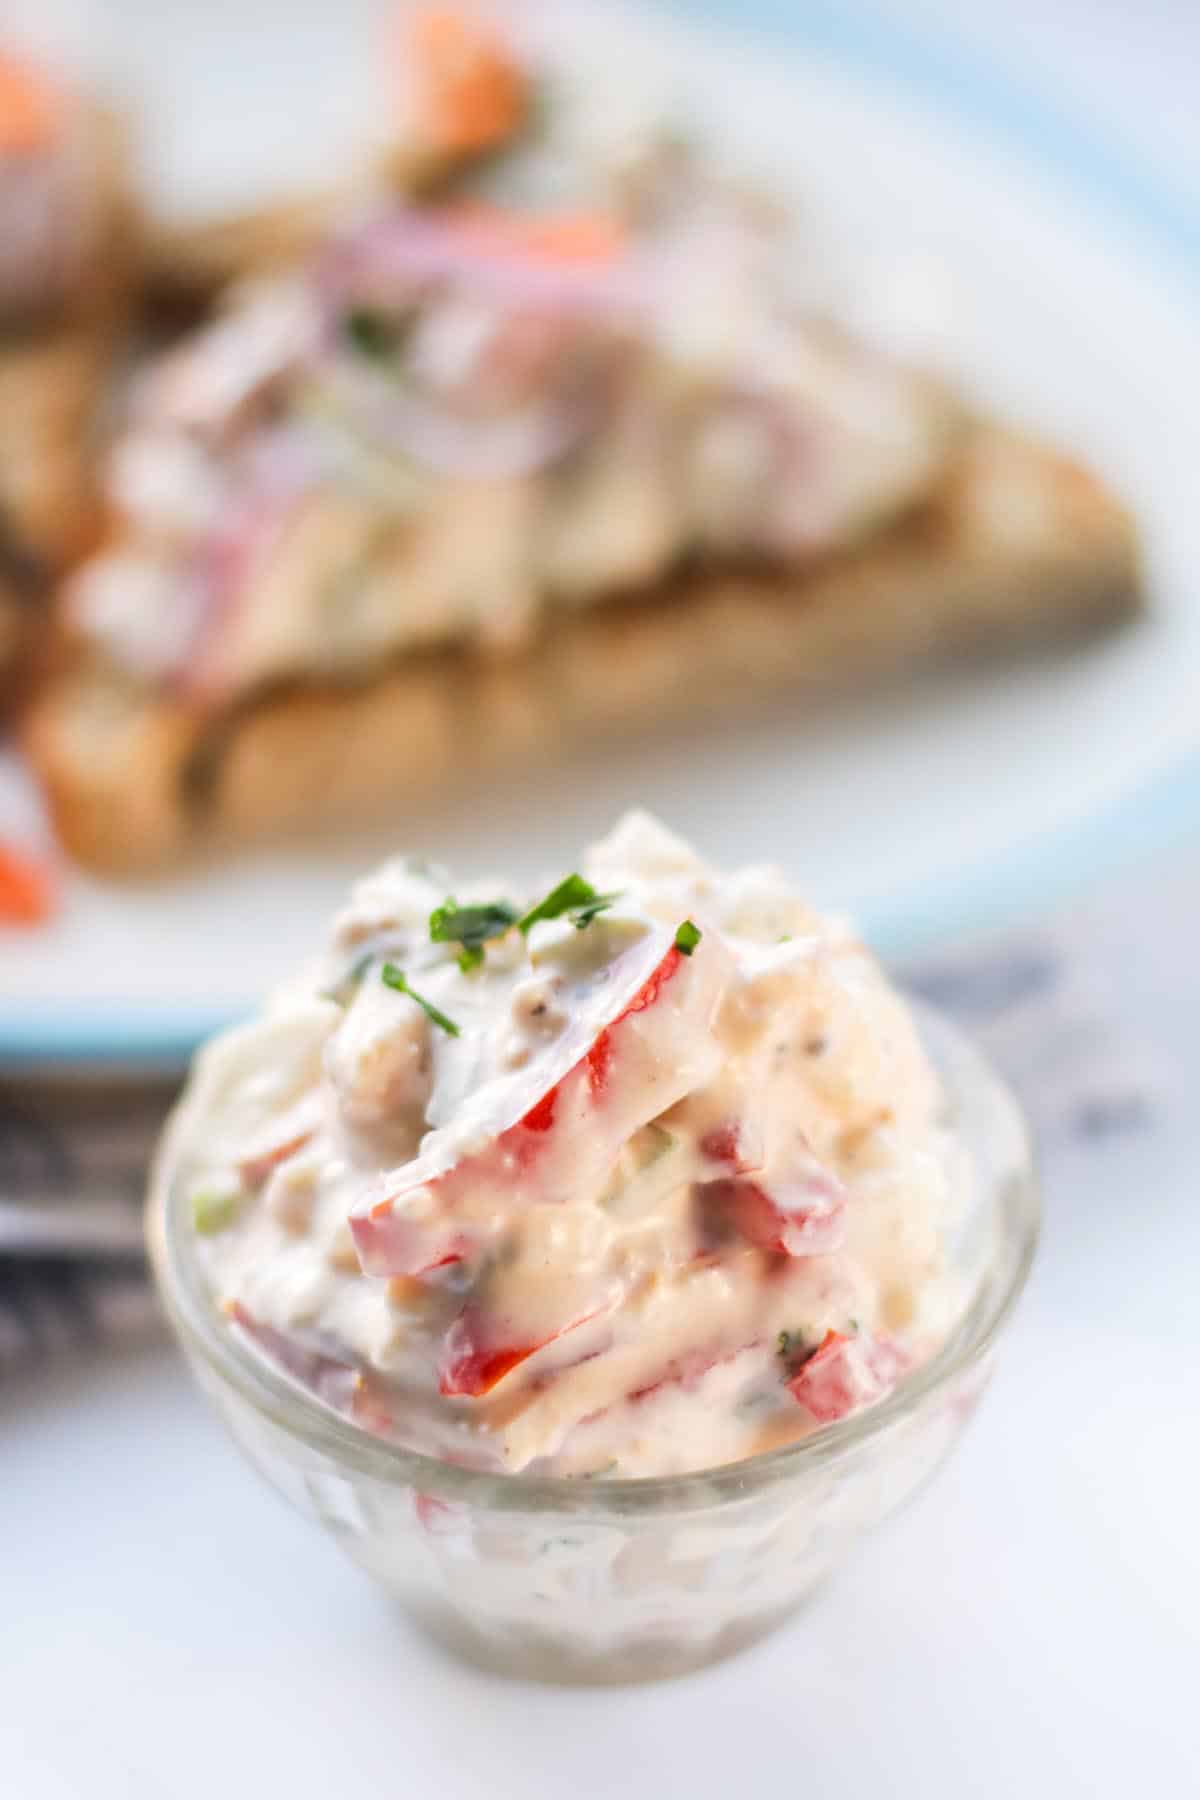 Egg salad in a small bowl.